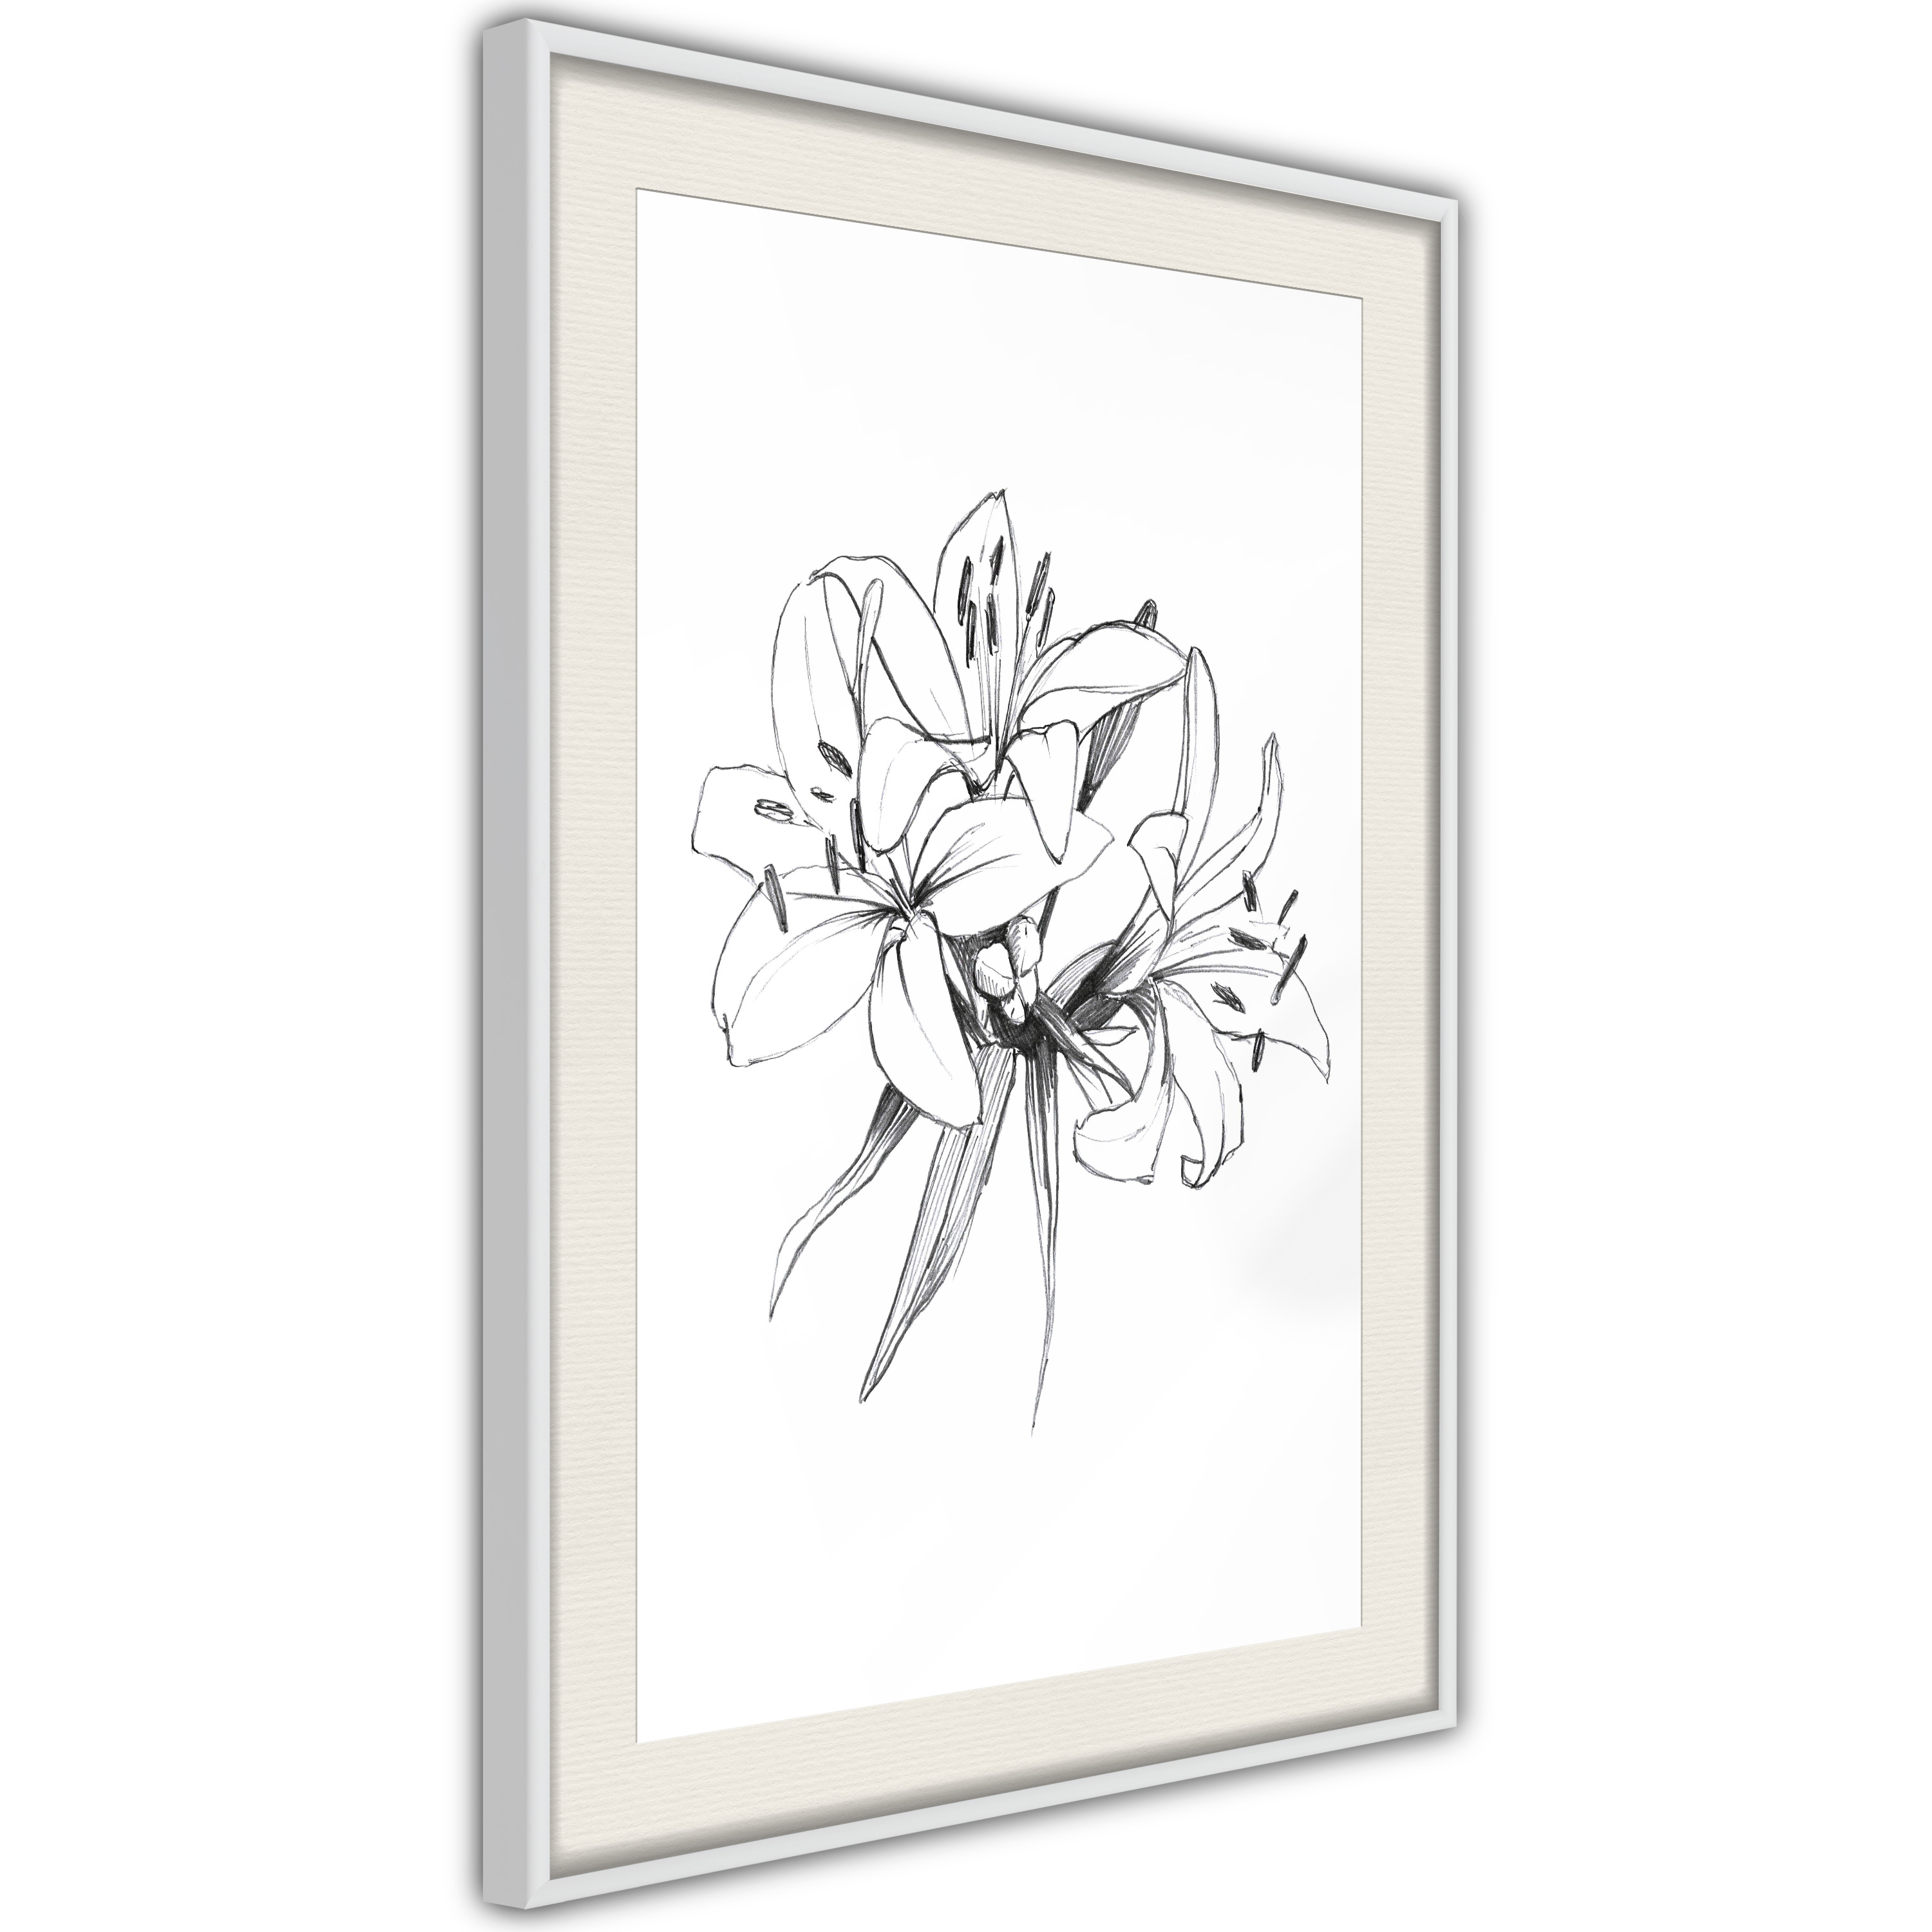 Poster - Sketch of Lillies - 30x45